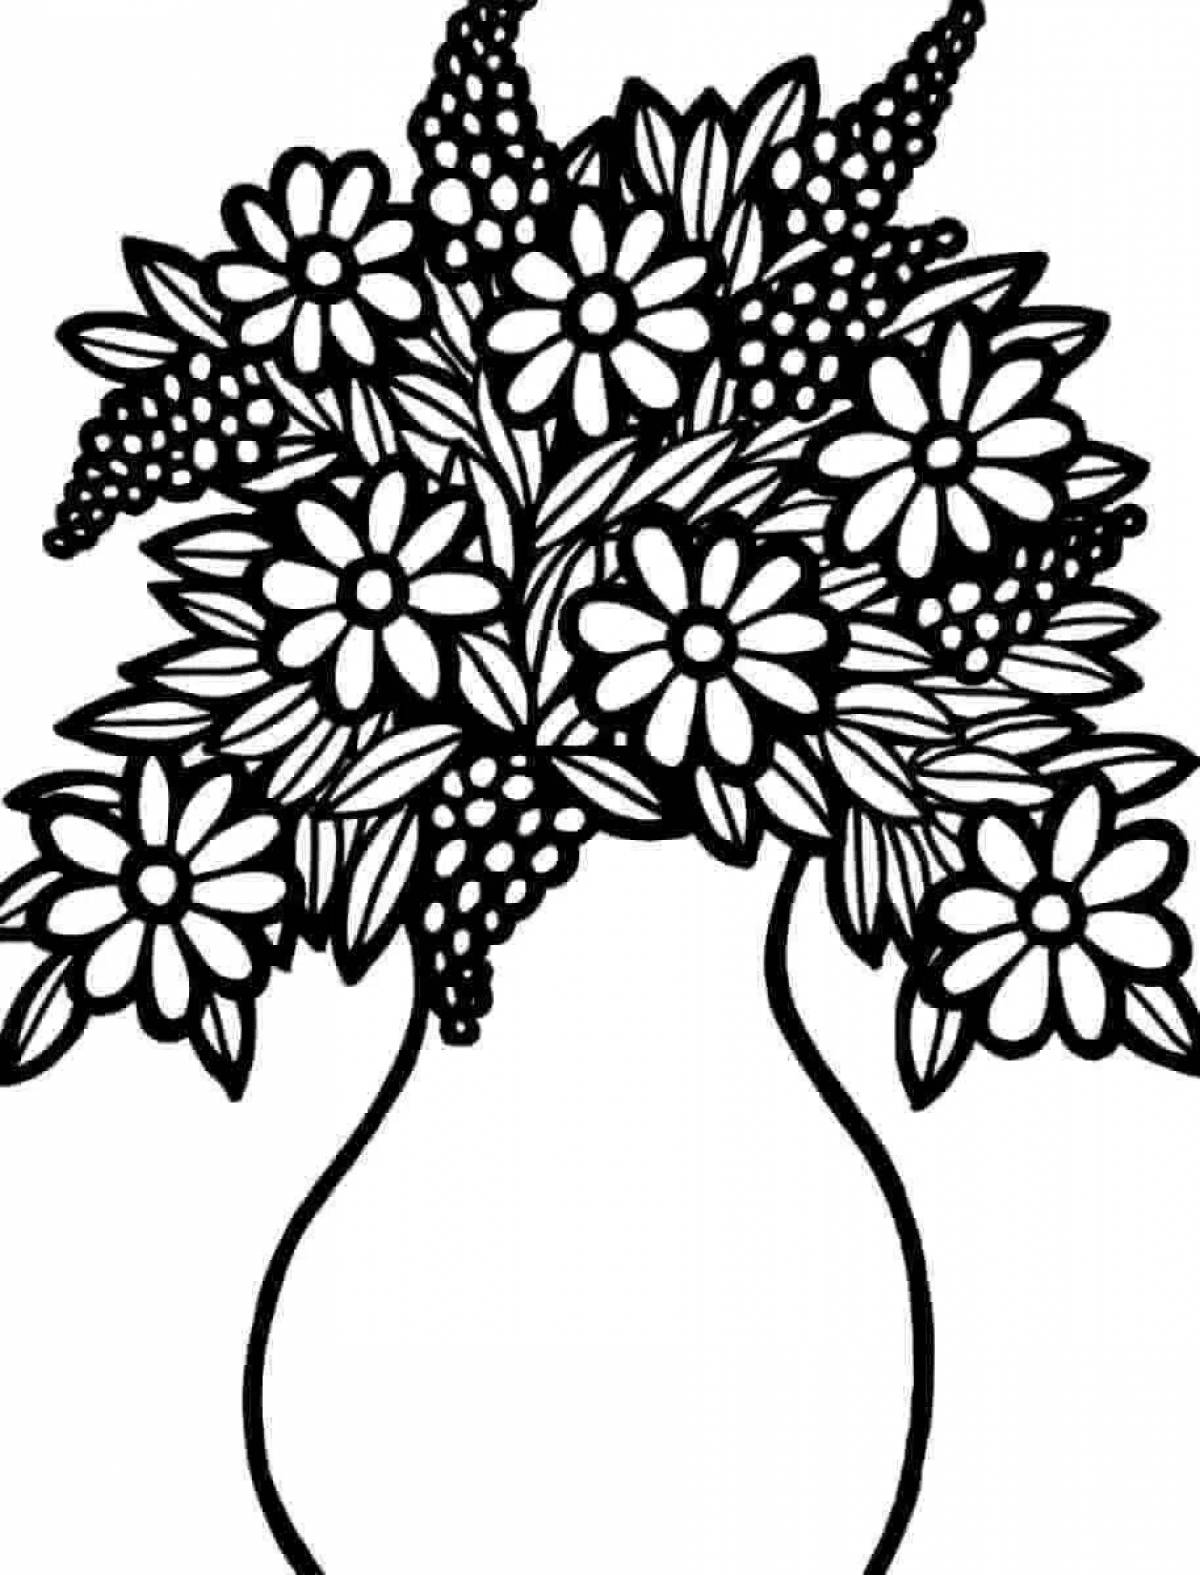 Bright bouquet of flowers in a vase coloring book